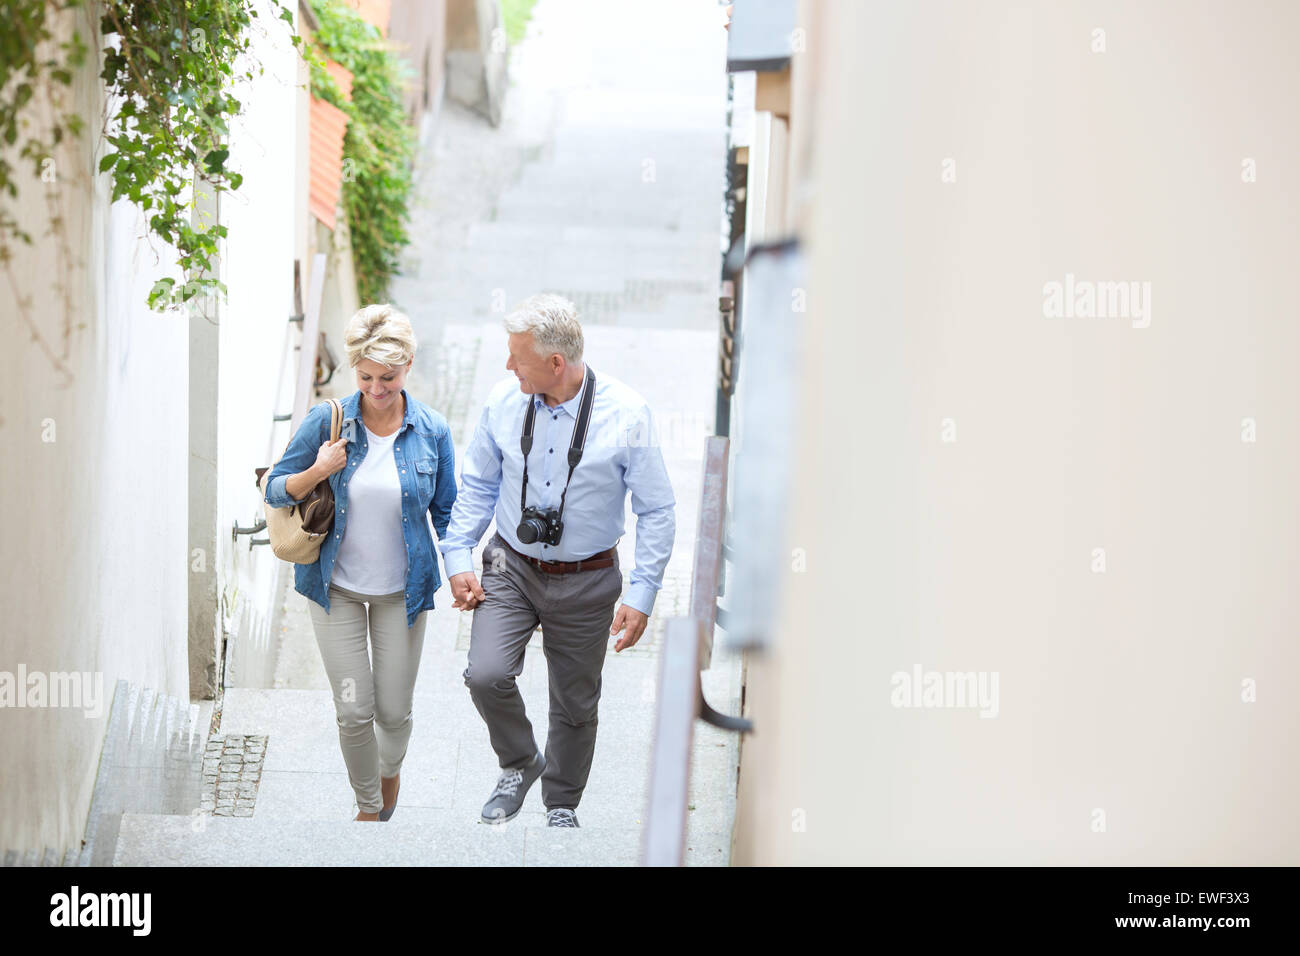 High angle view of middle-aged couple holding hands while climbing steps outdoors Stock Photo